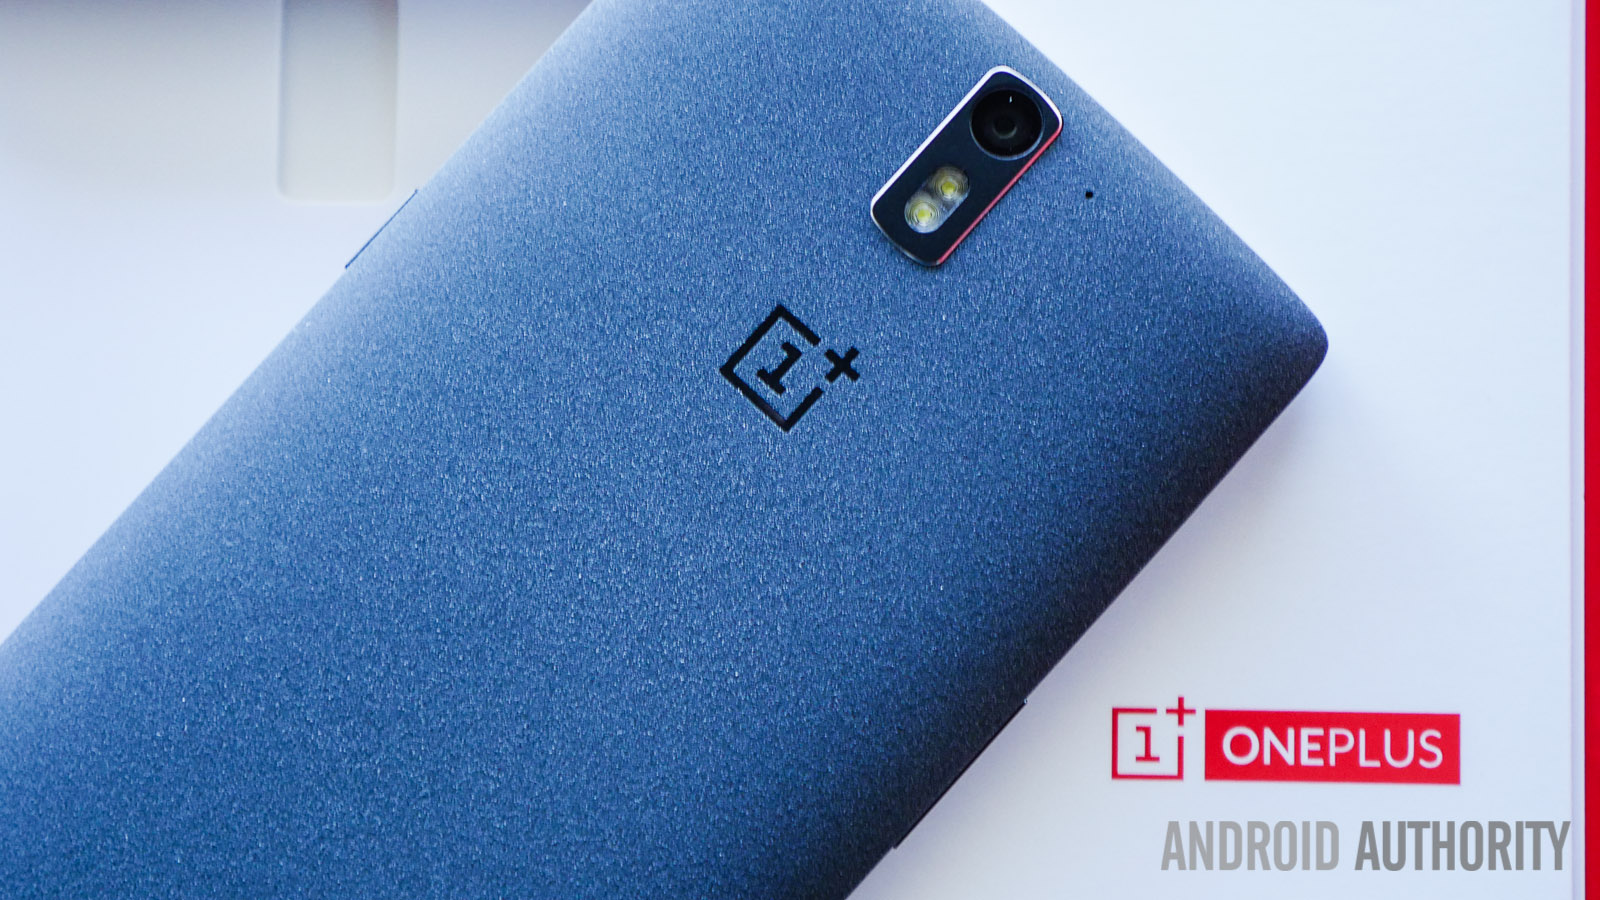 oneplus one unboxing (14 of 29)